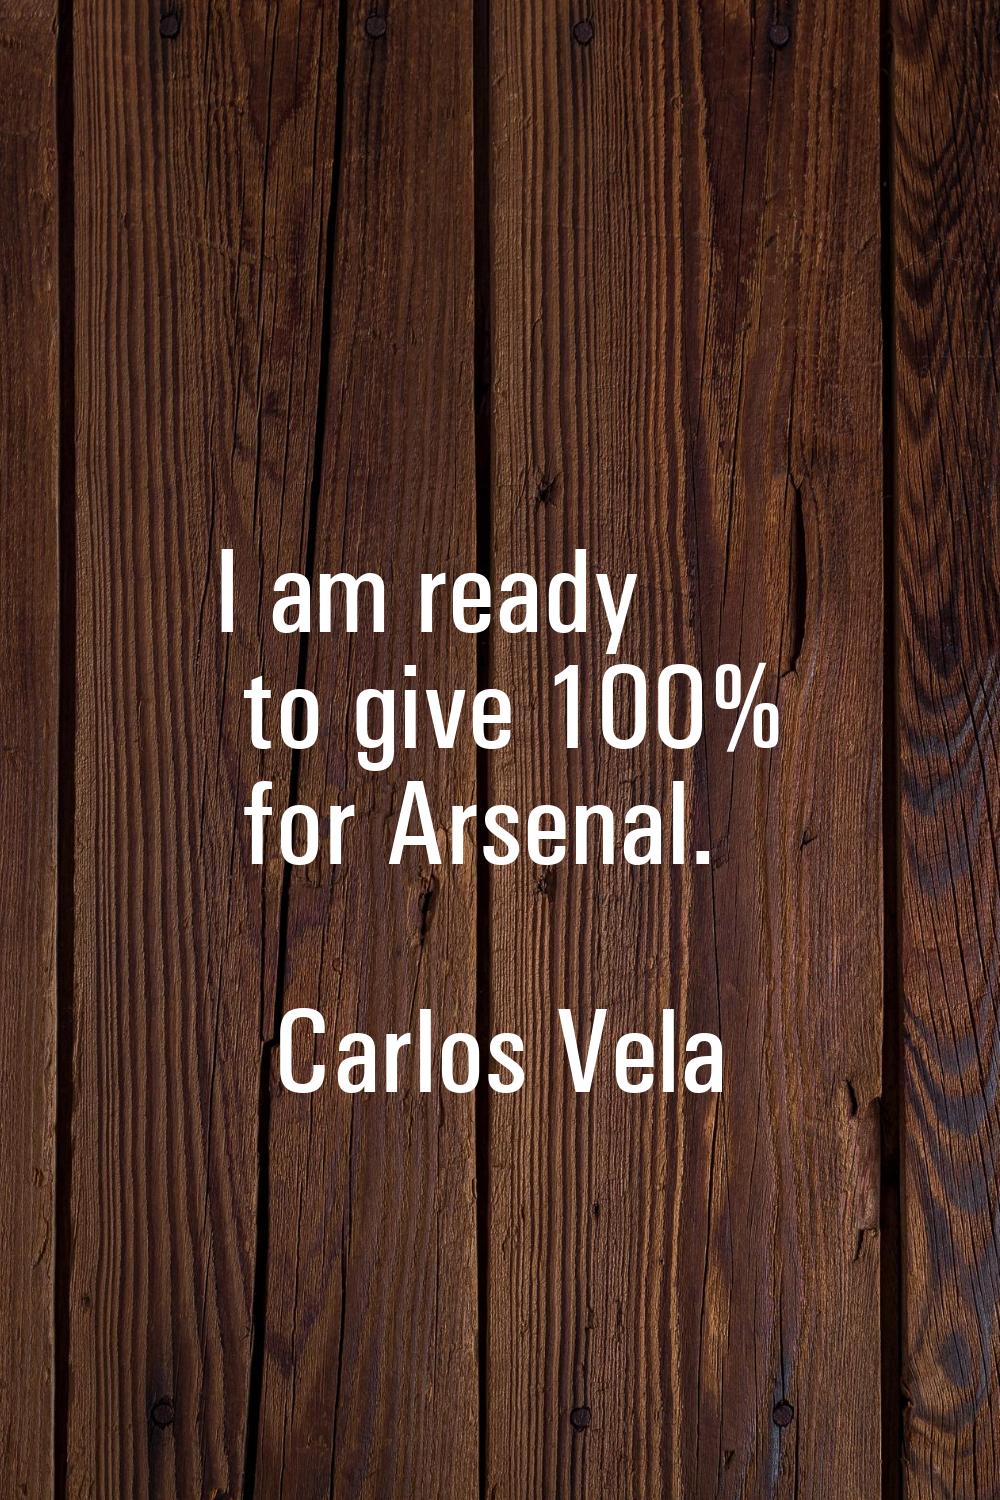 I am ready to give 100% for Arsenal.